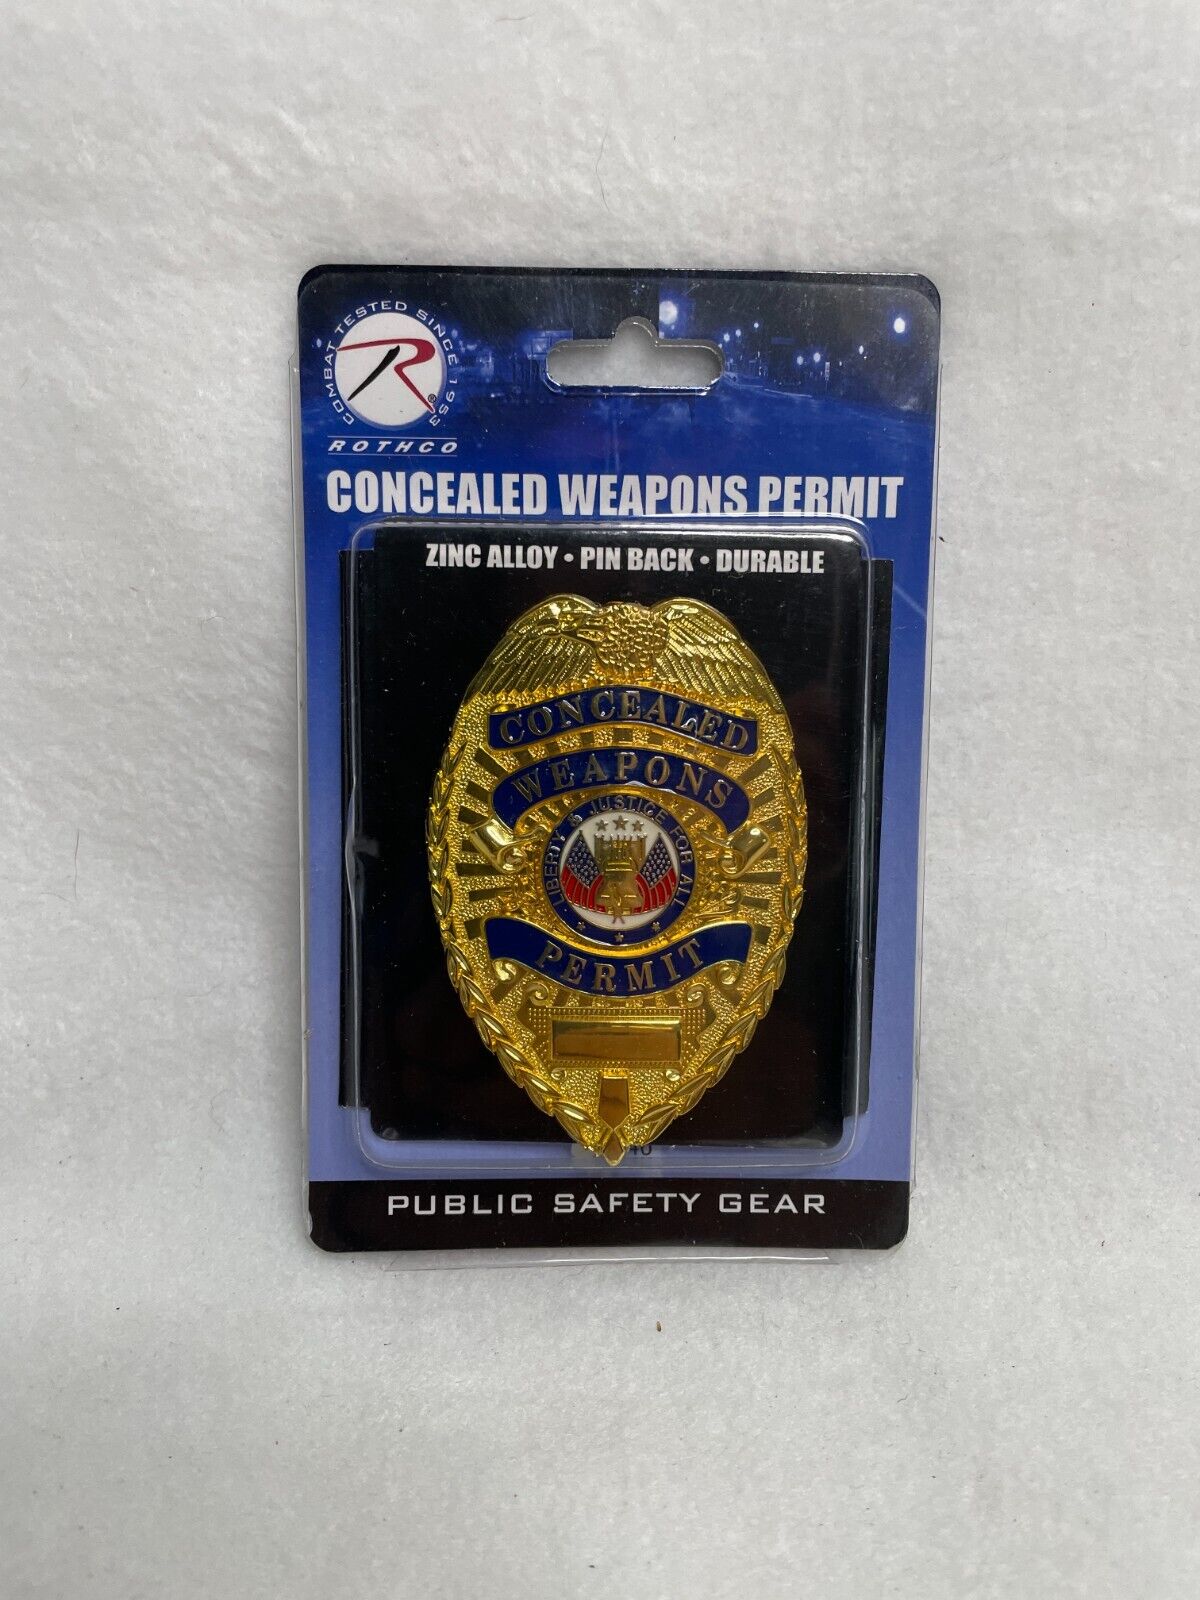 Rothco Concealed Weapons Permit Badge Pin Back, Zinc Alloy, Durable